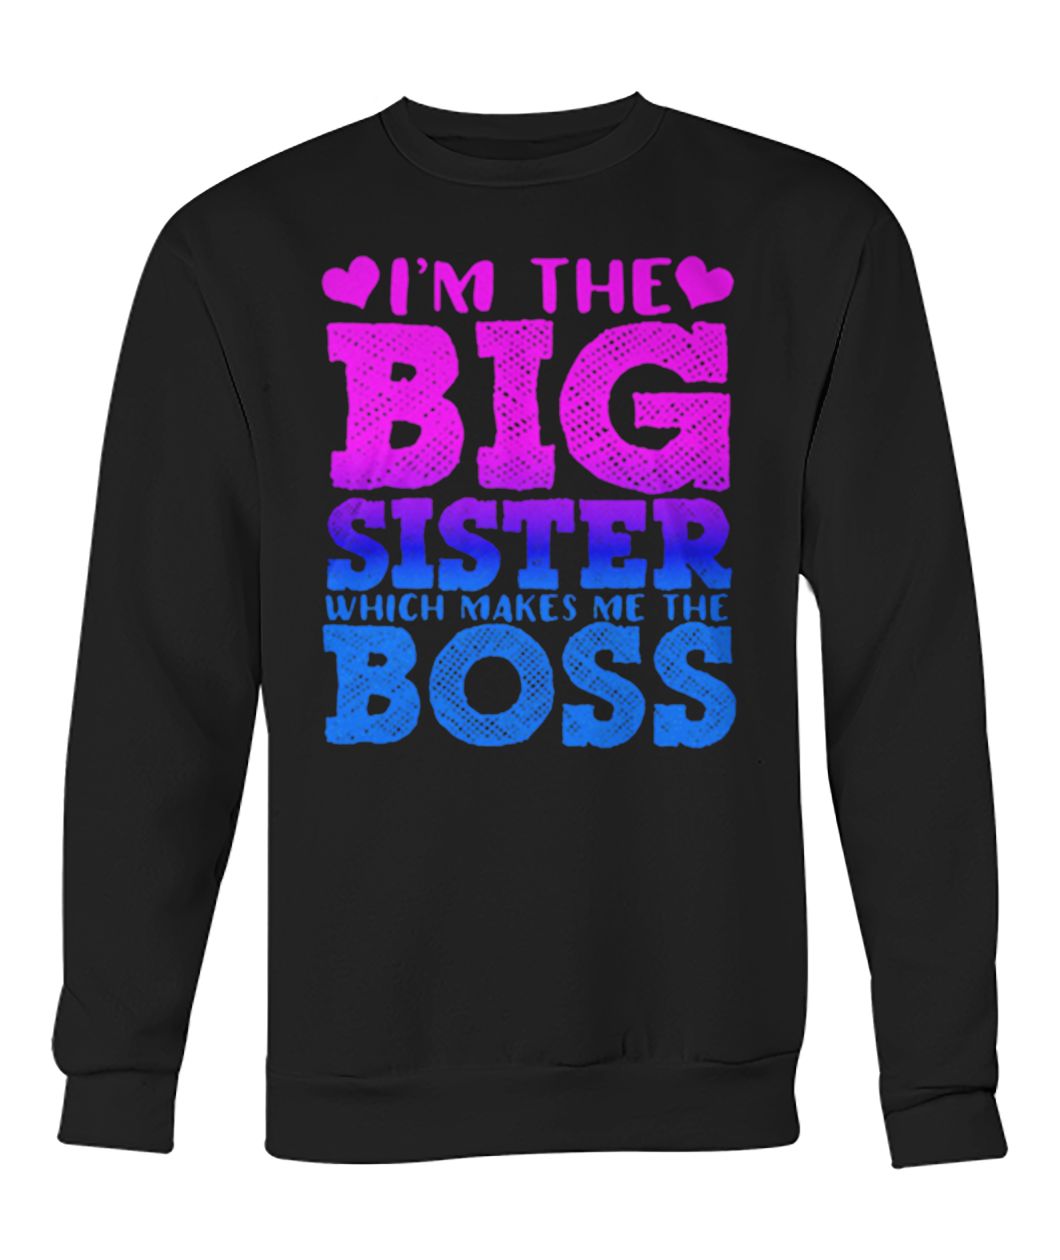 I'm the big sister which makes me boss crew neck sweatshirt